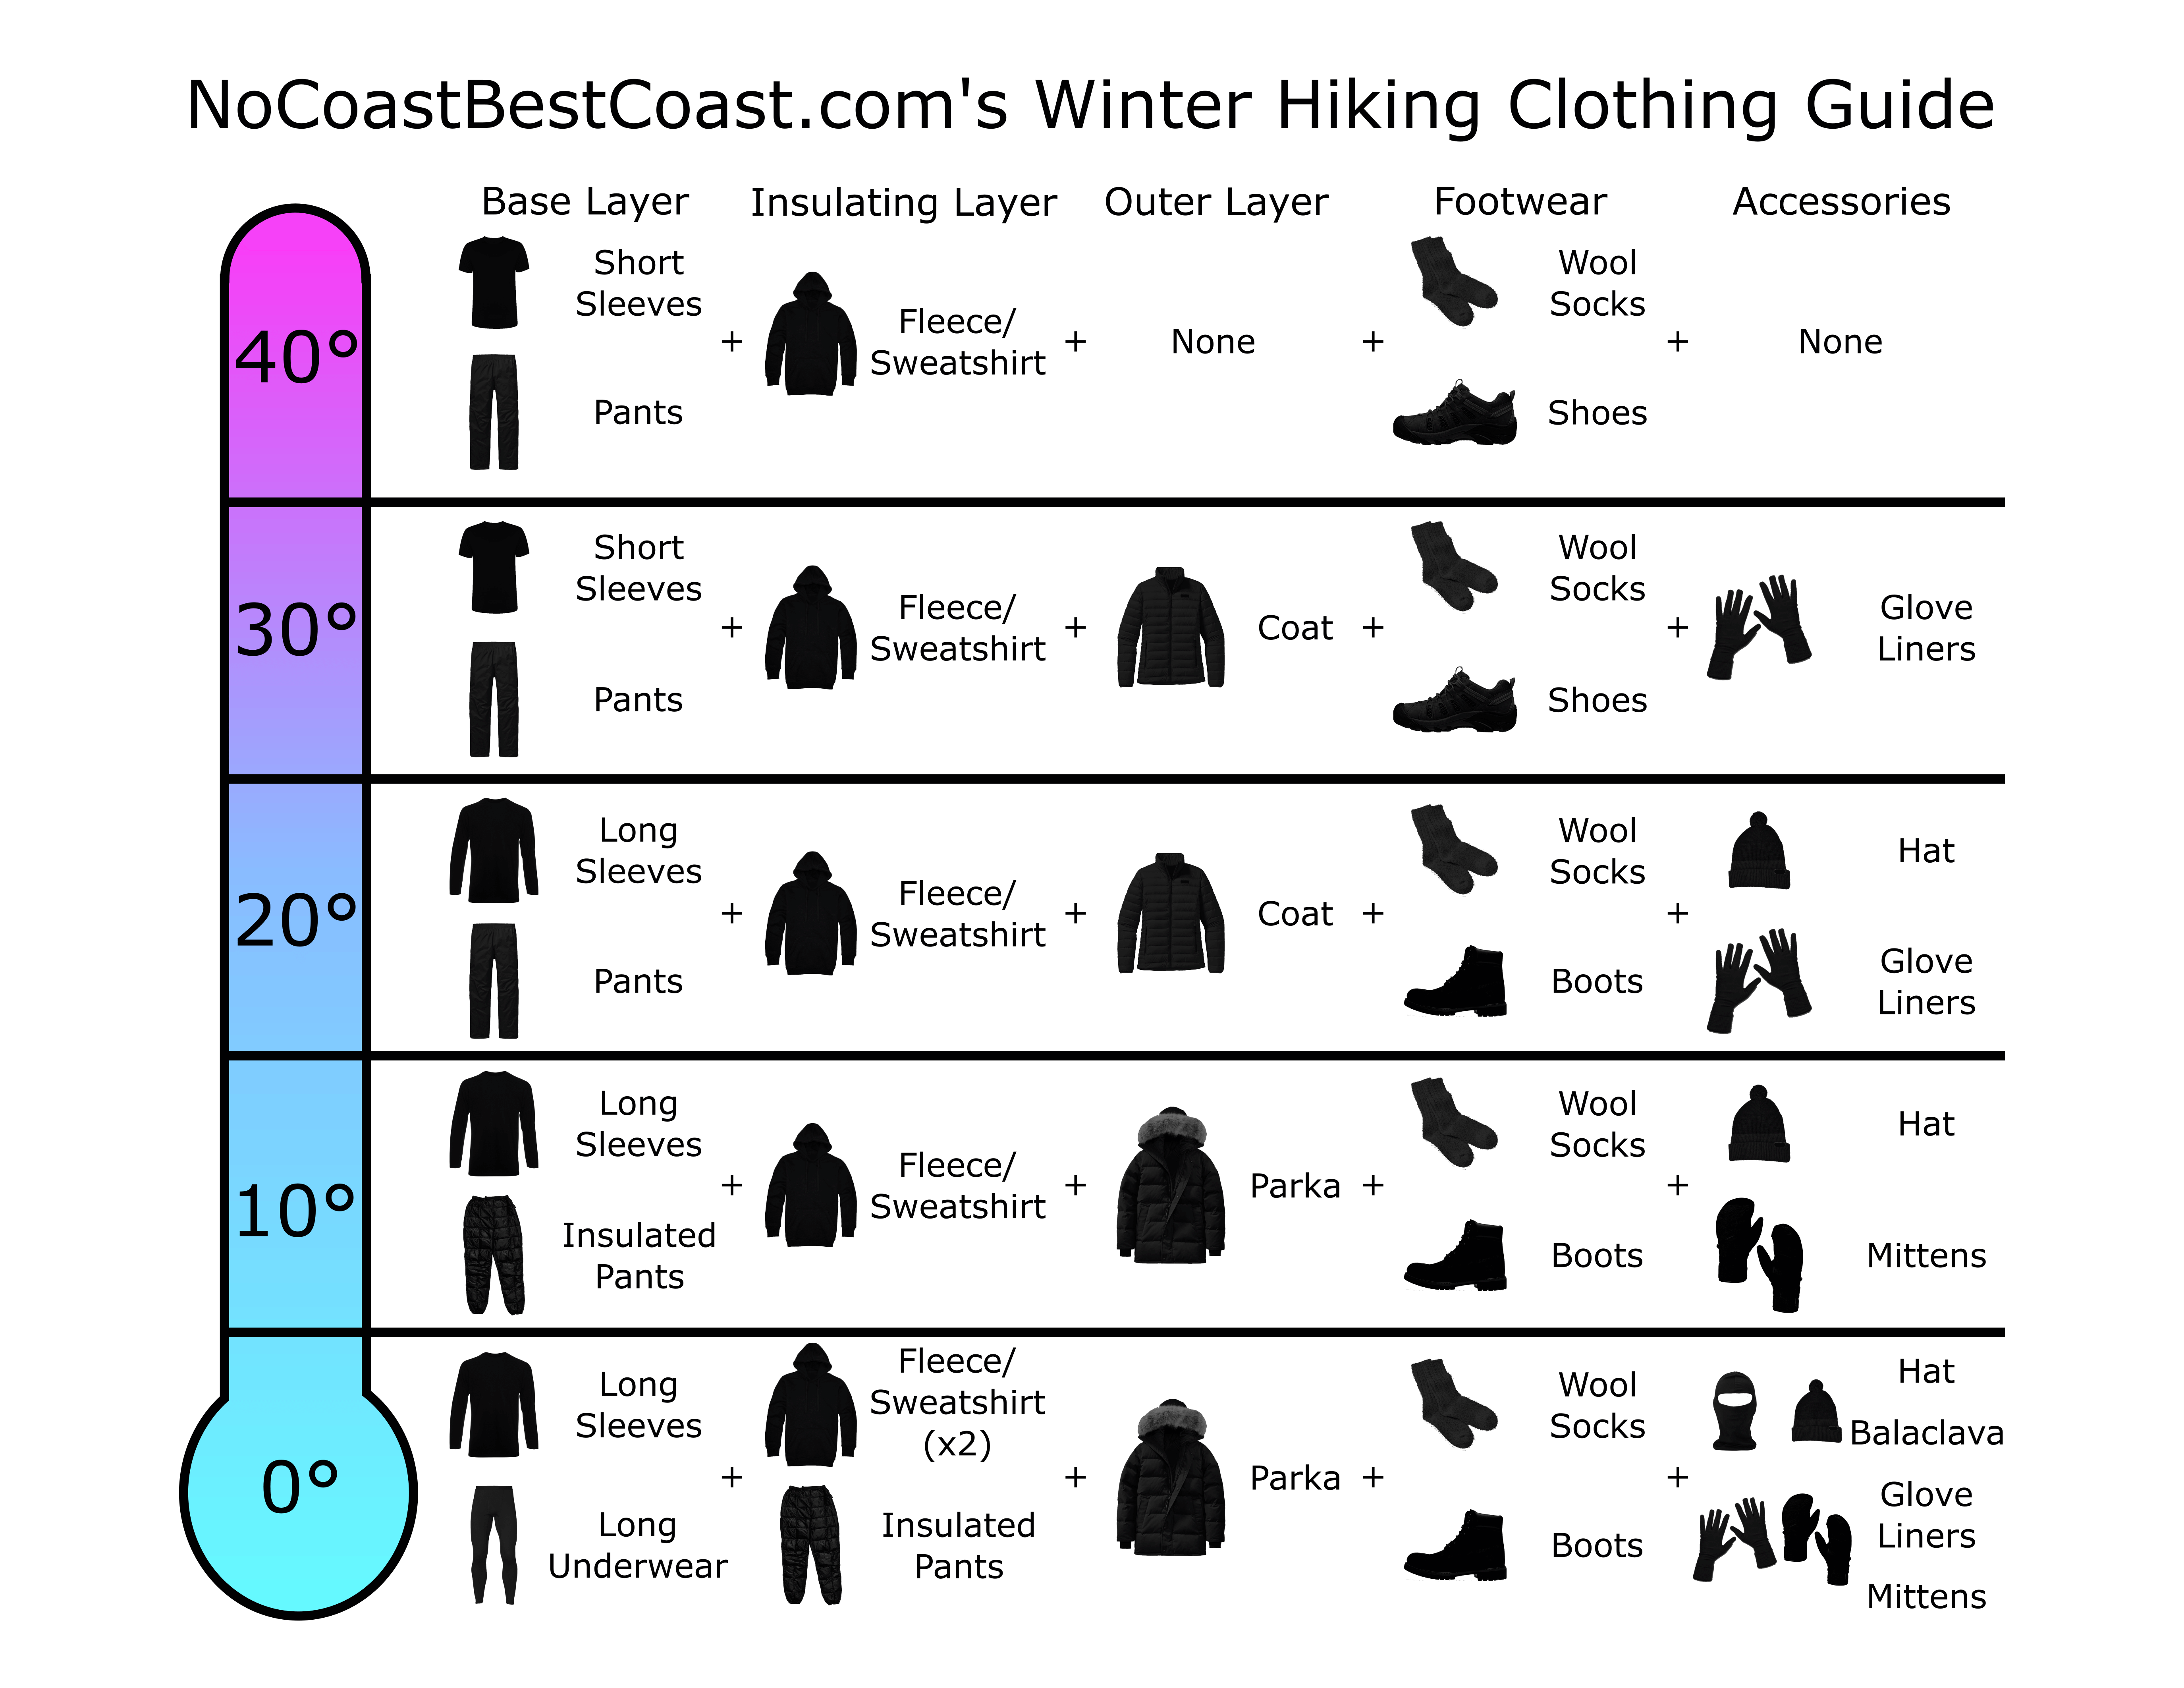 How to Dress For Winter Hiking in the Midwest